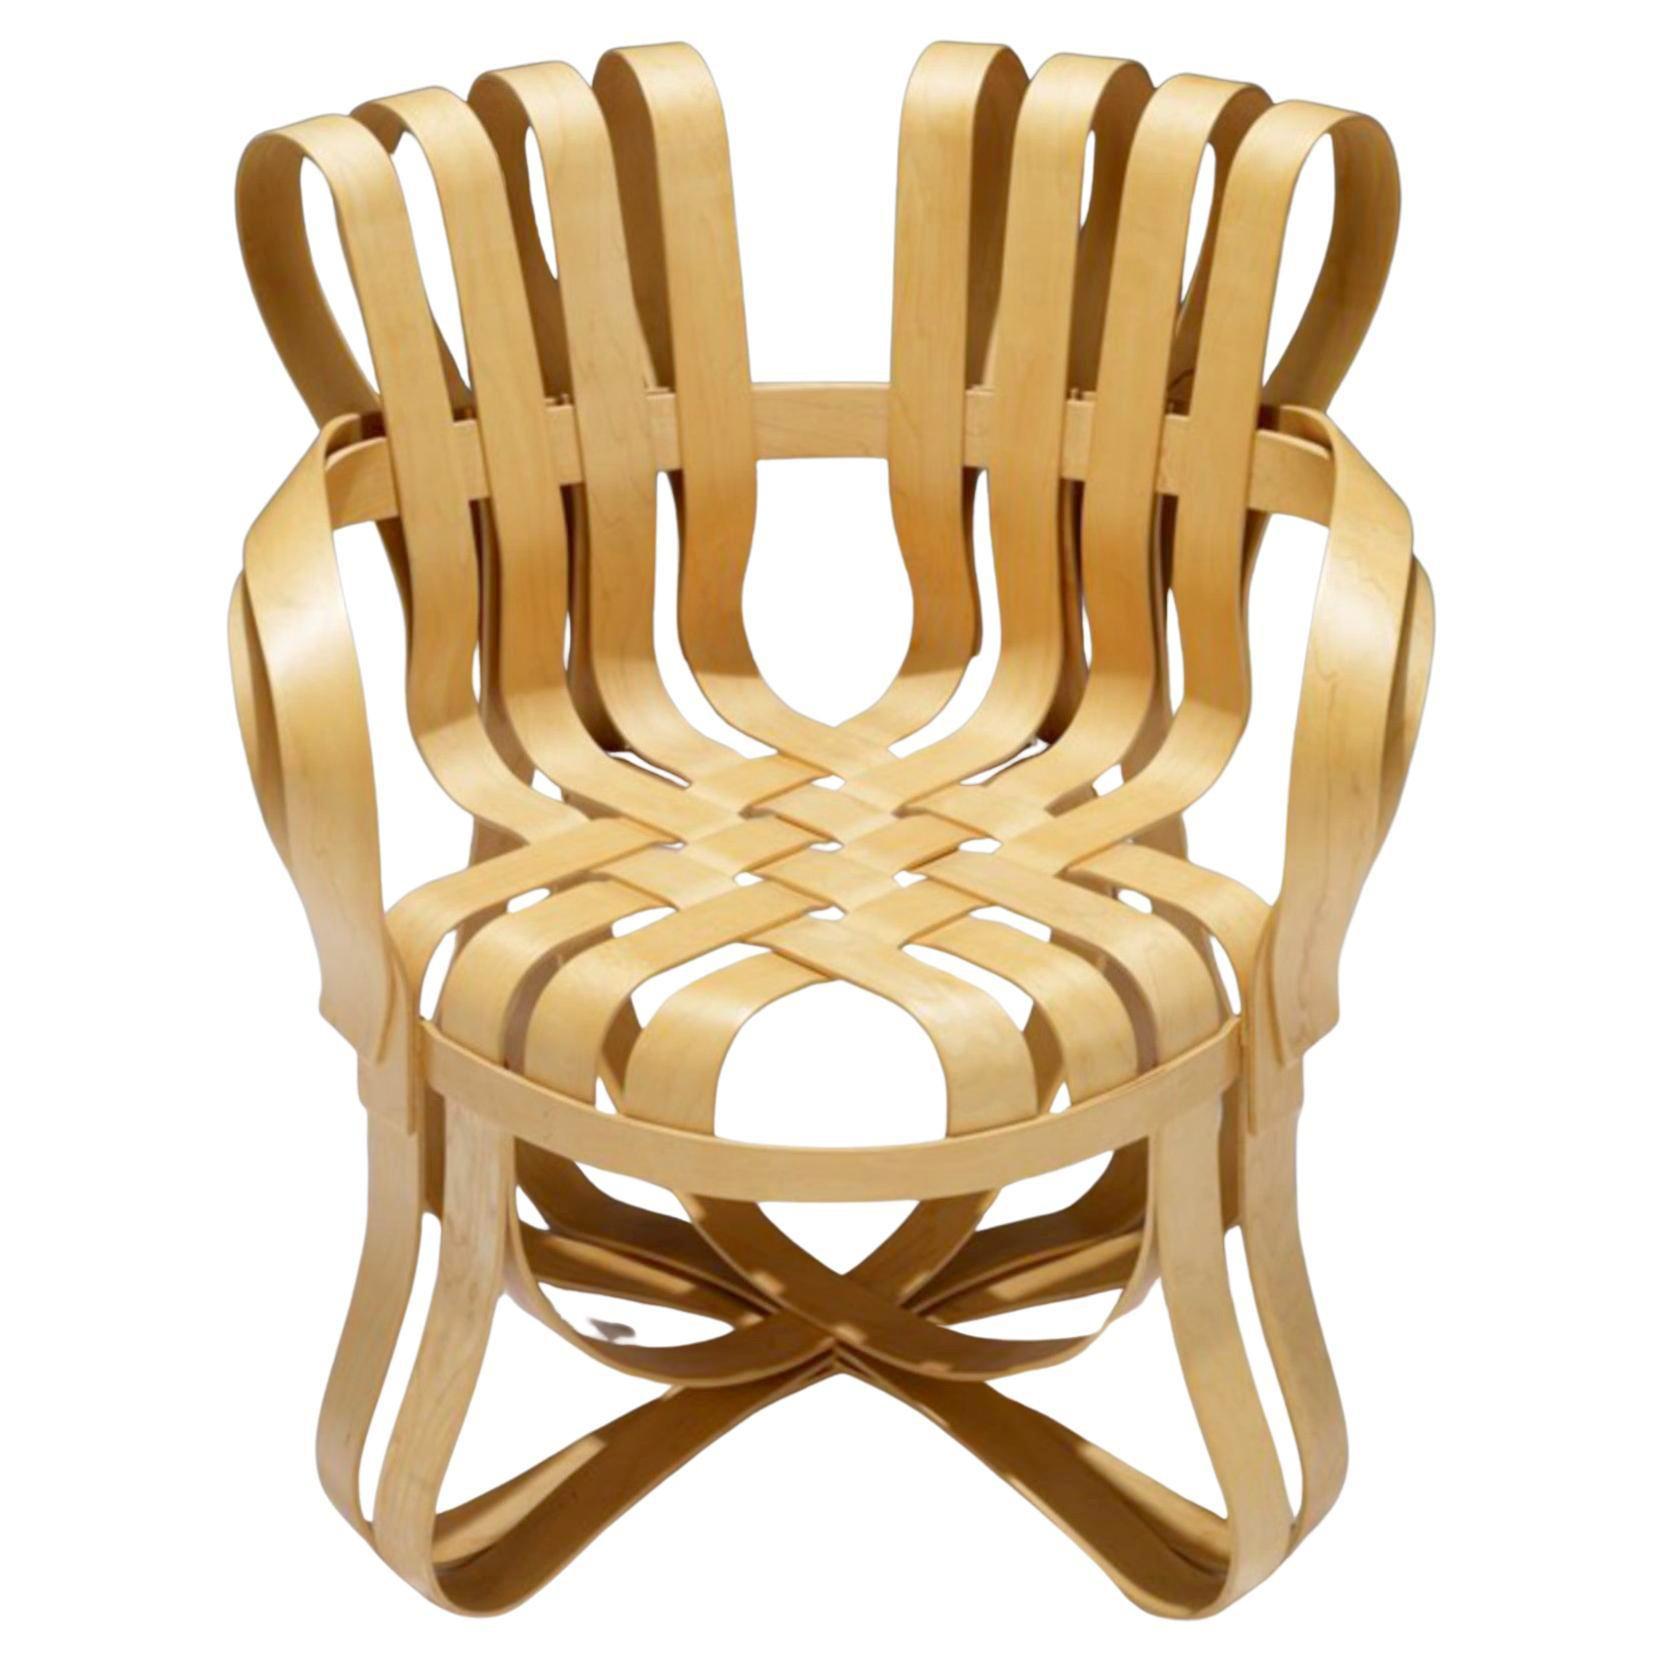 Inspired by the apple crates he had played on as a child, Pritzker Prize-winning architect Frank Gehry created the ribbon-like design of the Cross Check chair with interwoven maple strips. 
The graceful design integrates material with structure,